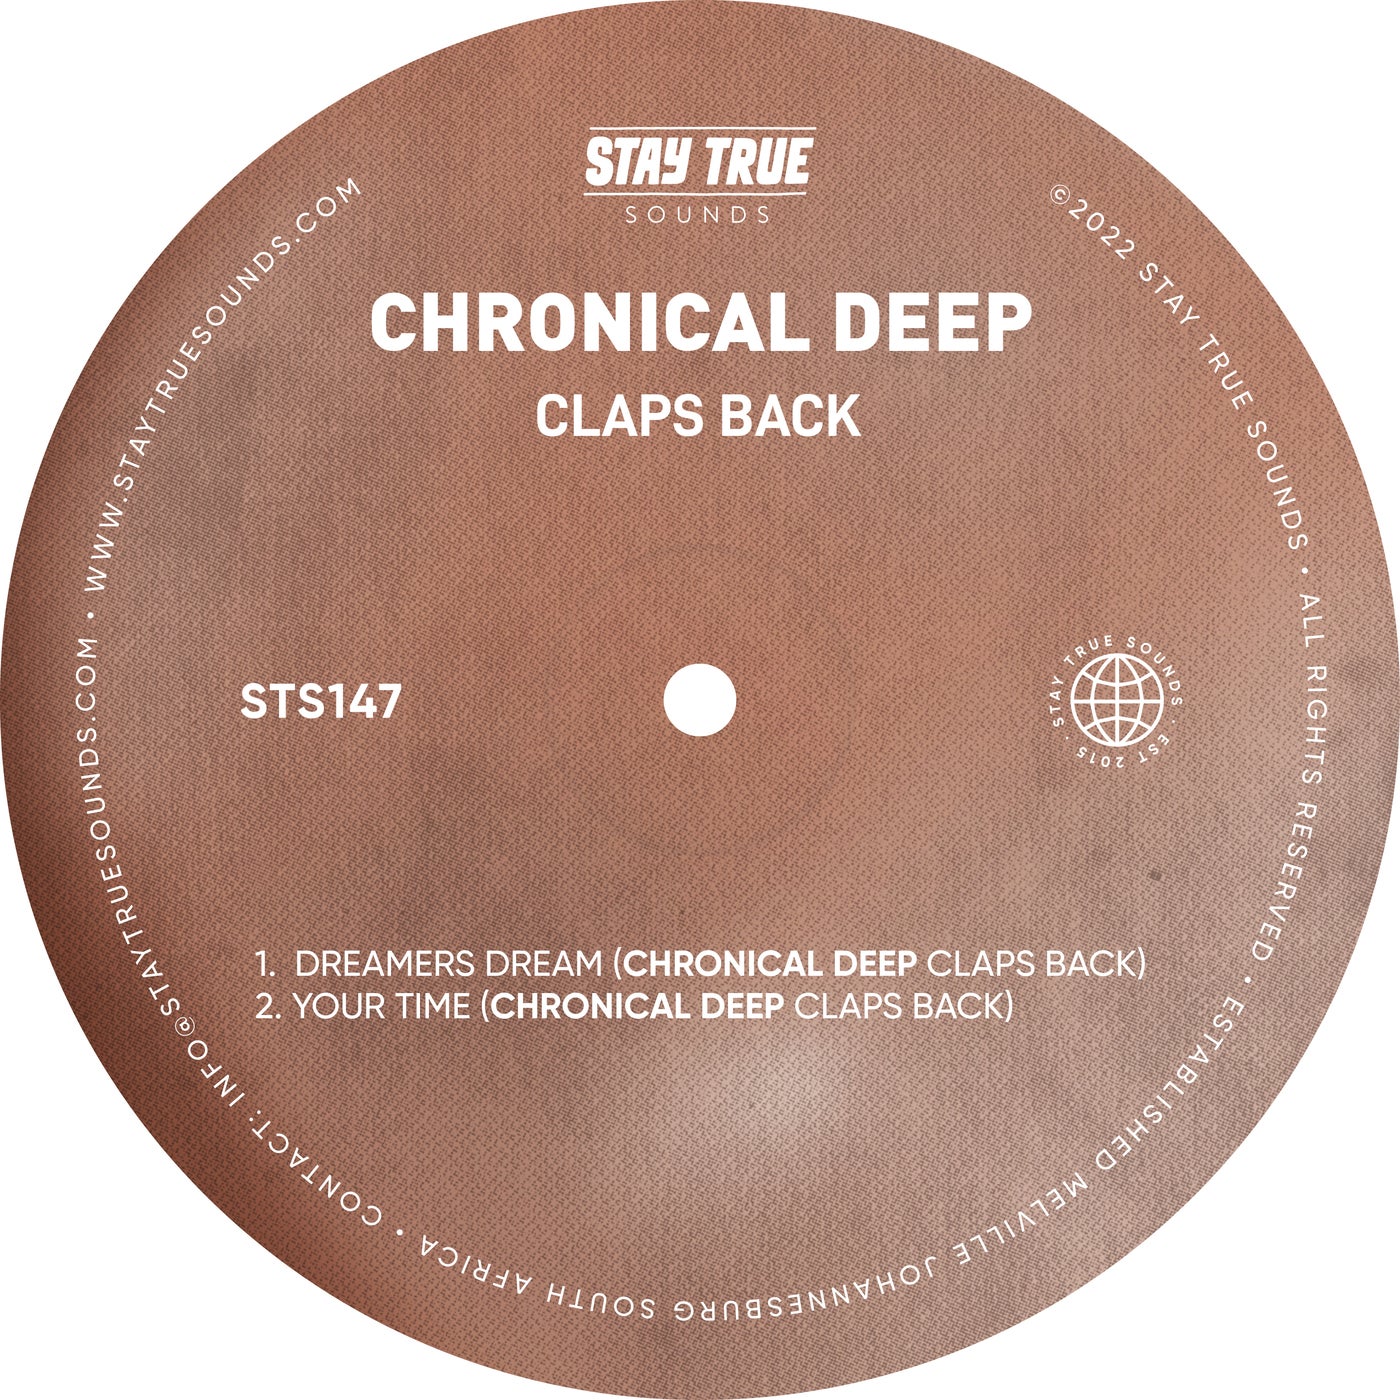 Chronical Deep - Claps Back [Stay True Sounds]